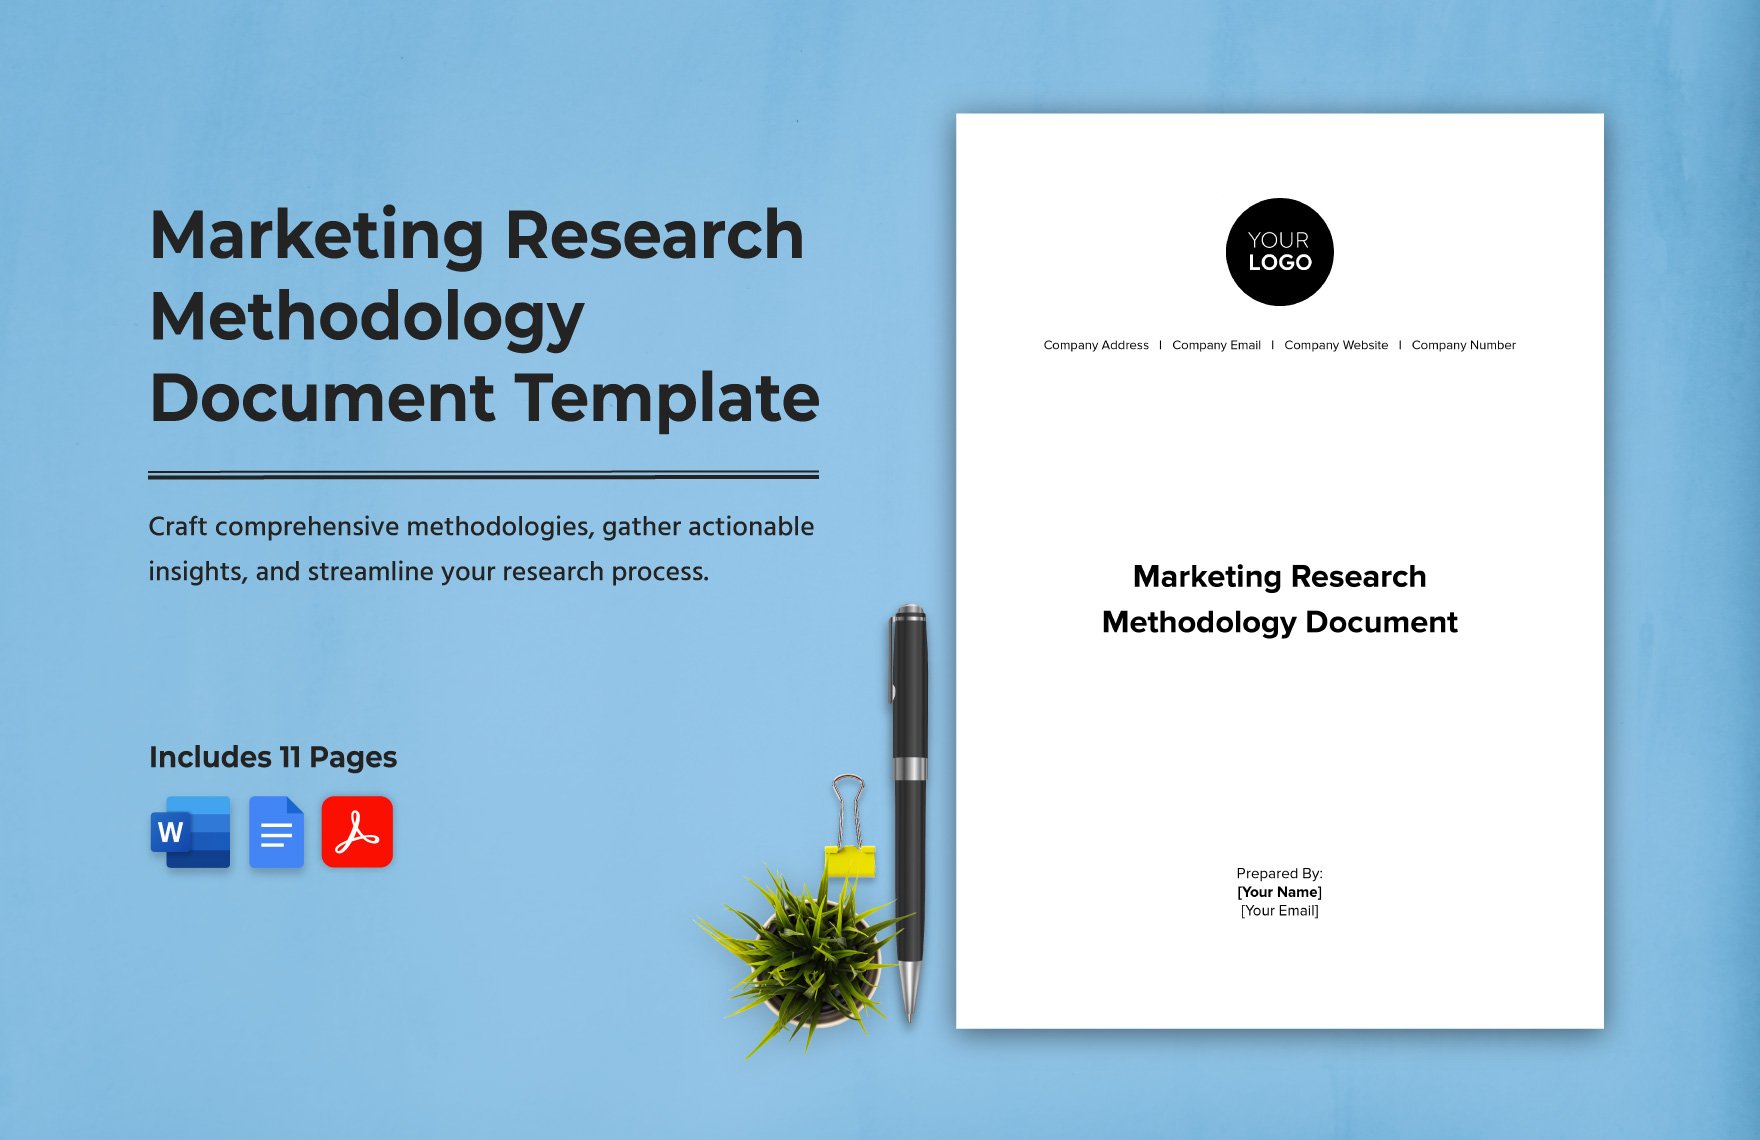 Marketing Research Methodology Document Template in Word, Google Docs, PDF